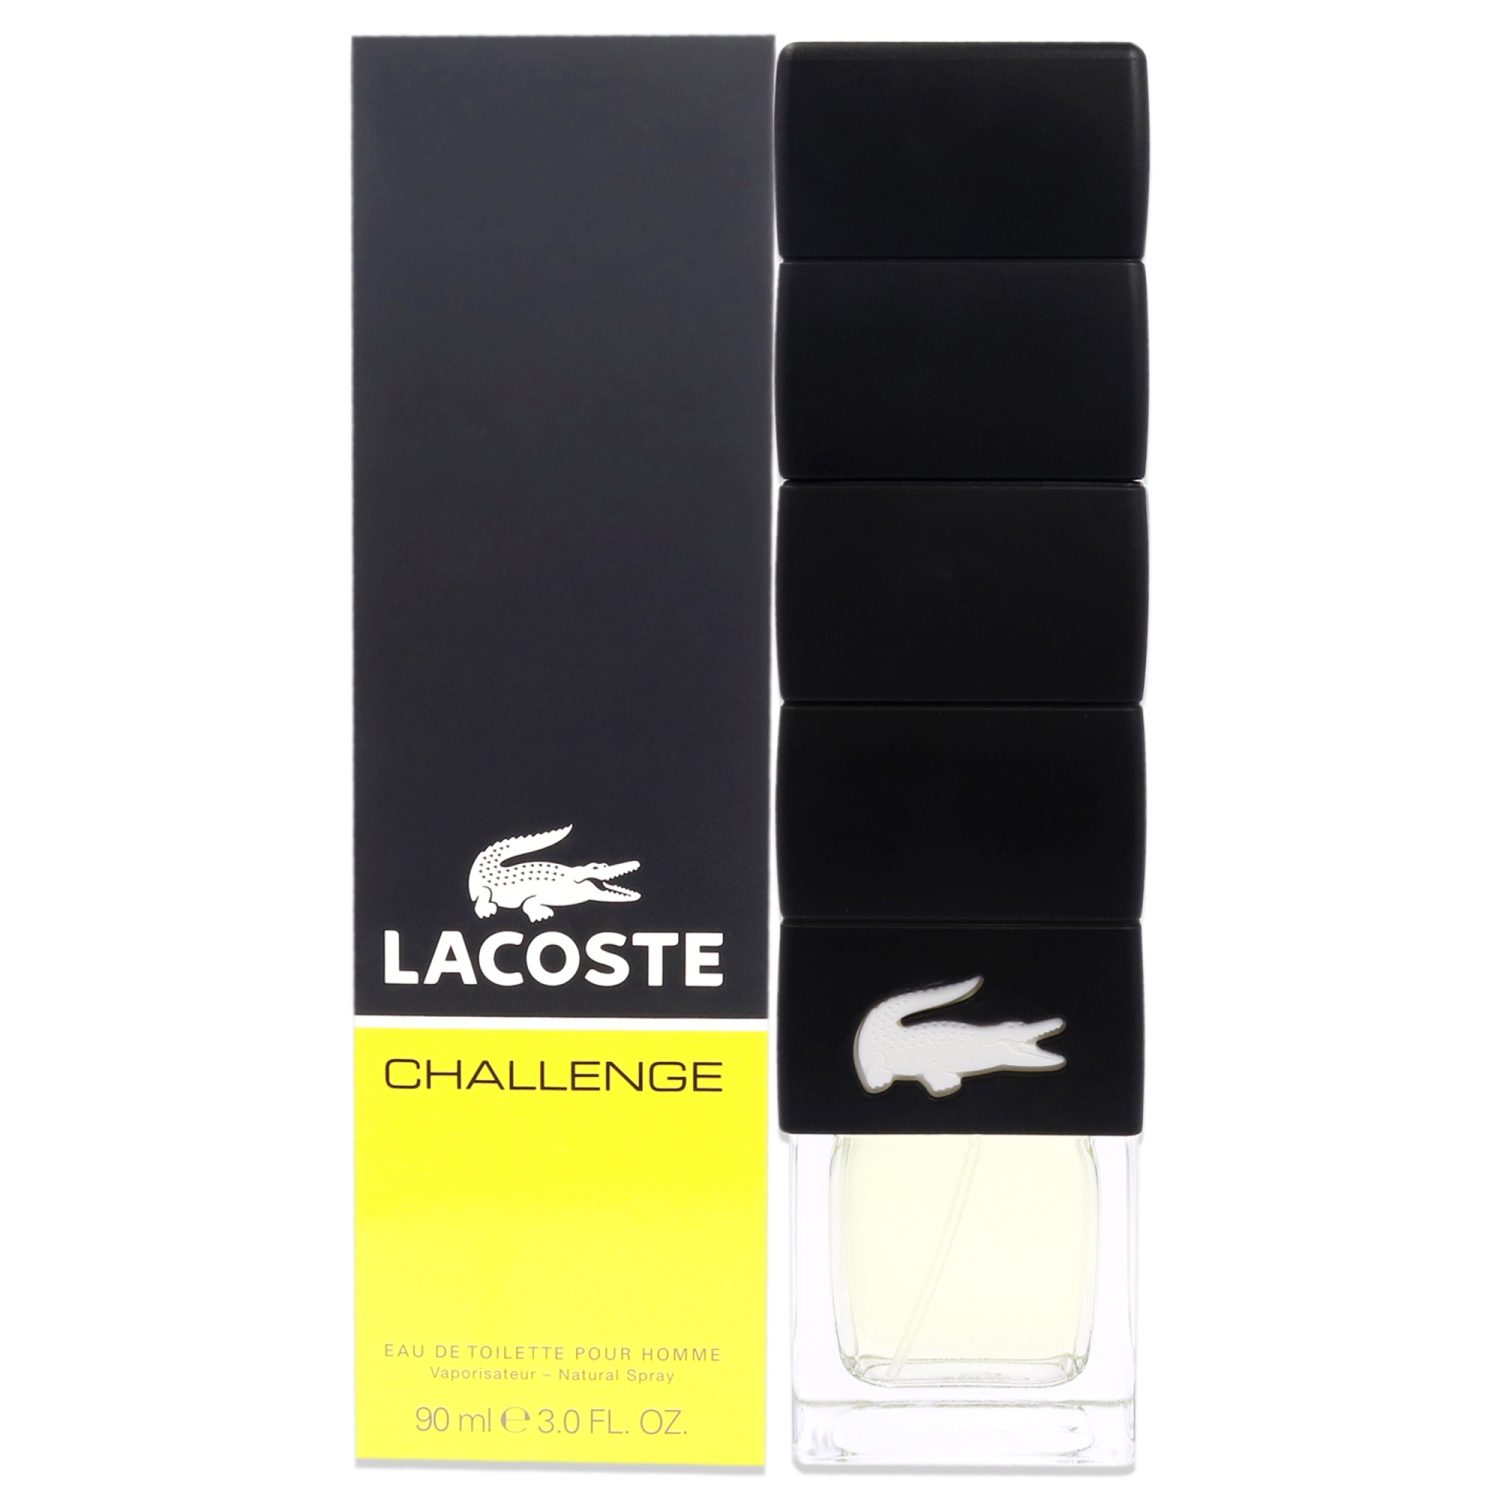 Lacoste Challenge by Lacoste for Men - 3 oz EDT Spray